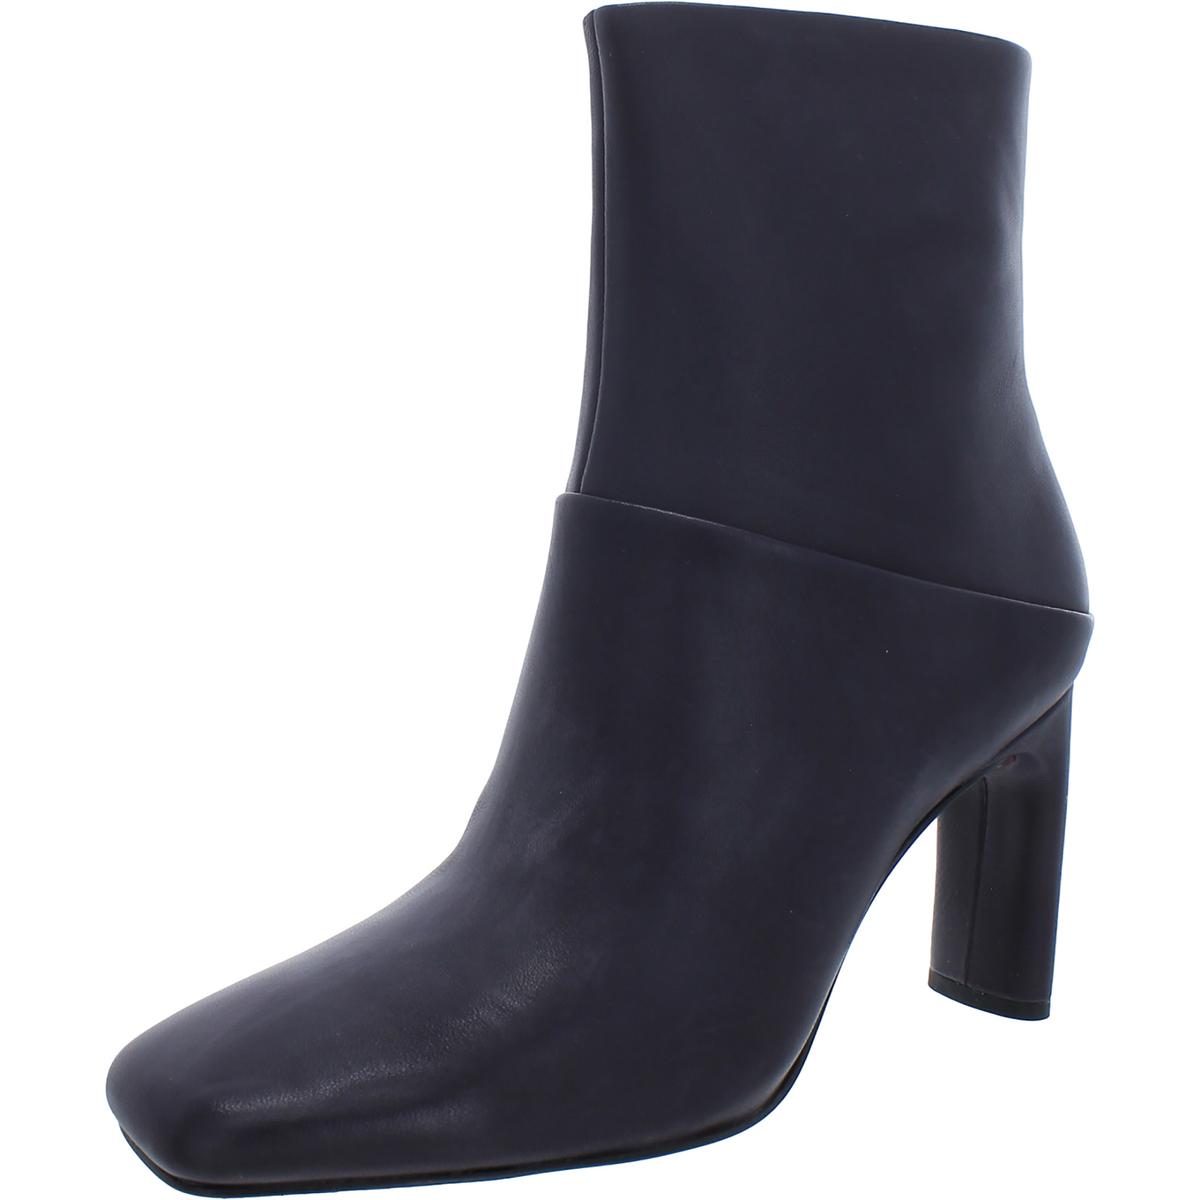 Pre-owned Sarto Franco Sarto Womens Flexa Leather Square Toe Ankle Booties Shoes Bhfo 9208 In Eggplant Leather